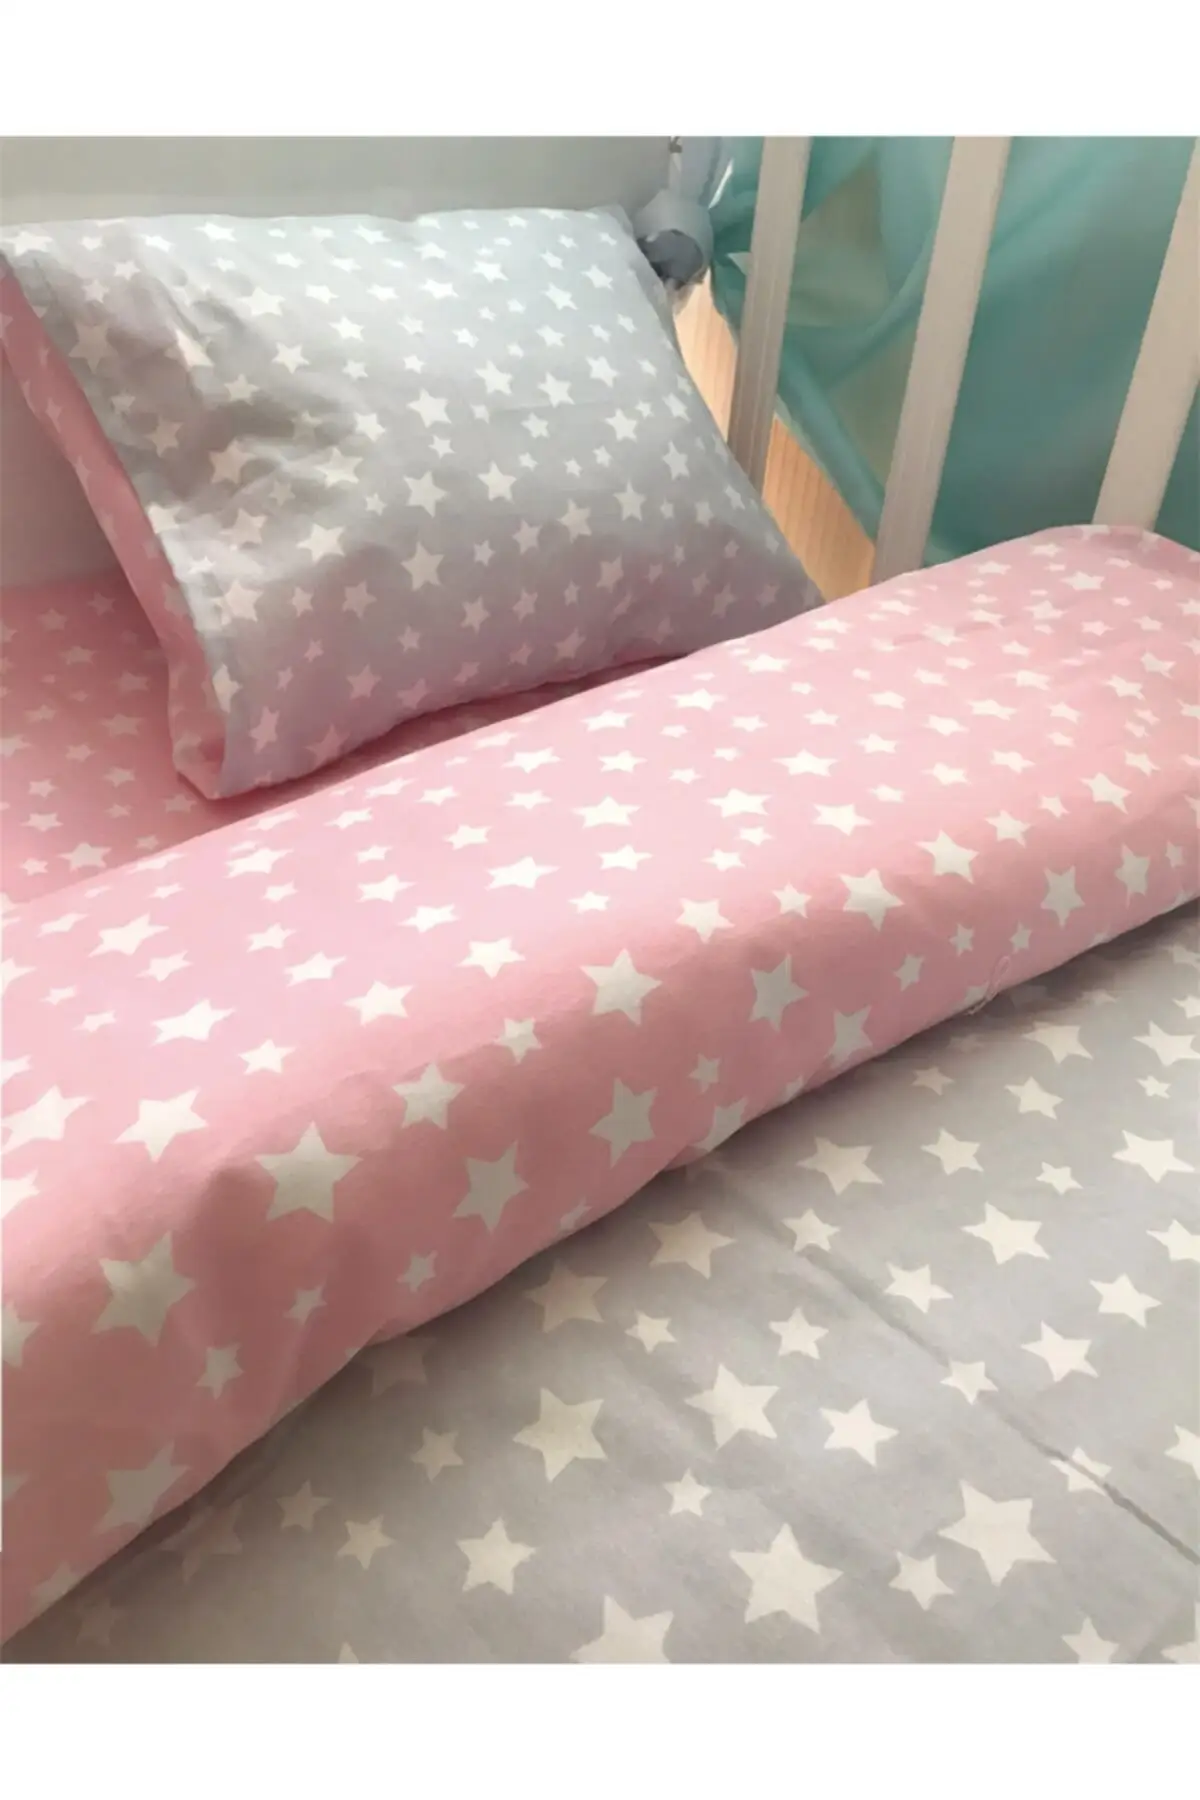 Cotton Baby/child Bedding Pillow Quilt Set Pink/gray Star 60x120 Baby & Kids Home Textile textile & Furniture